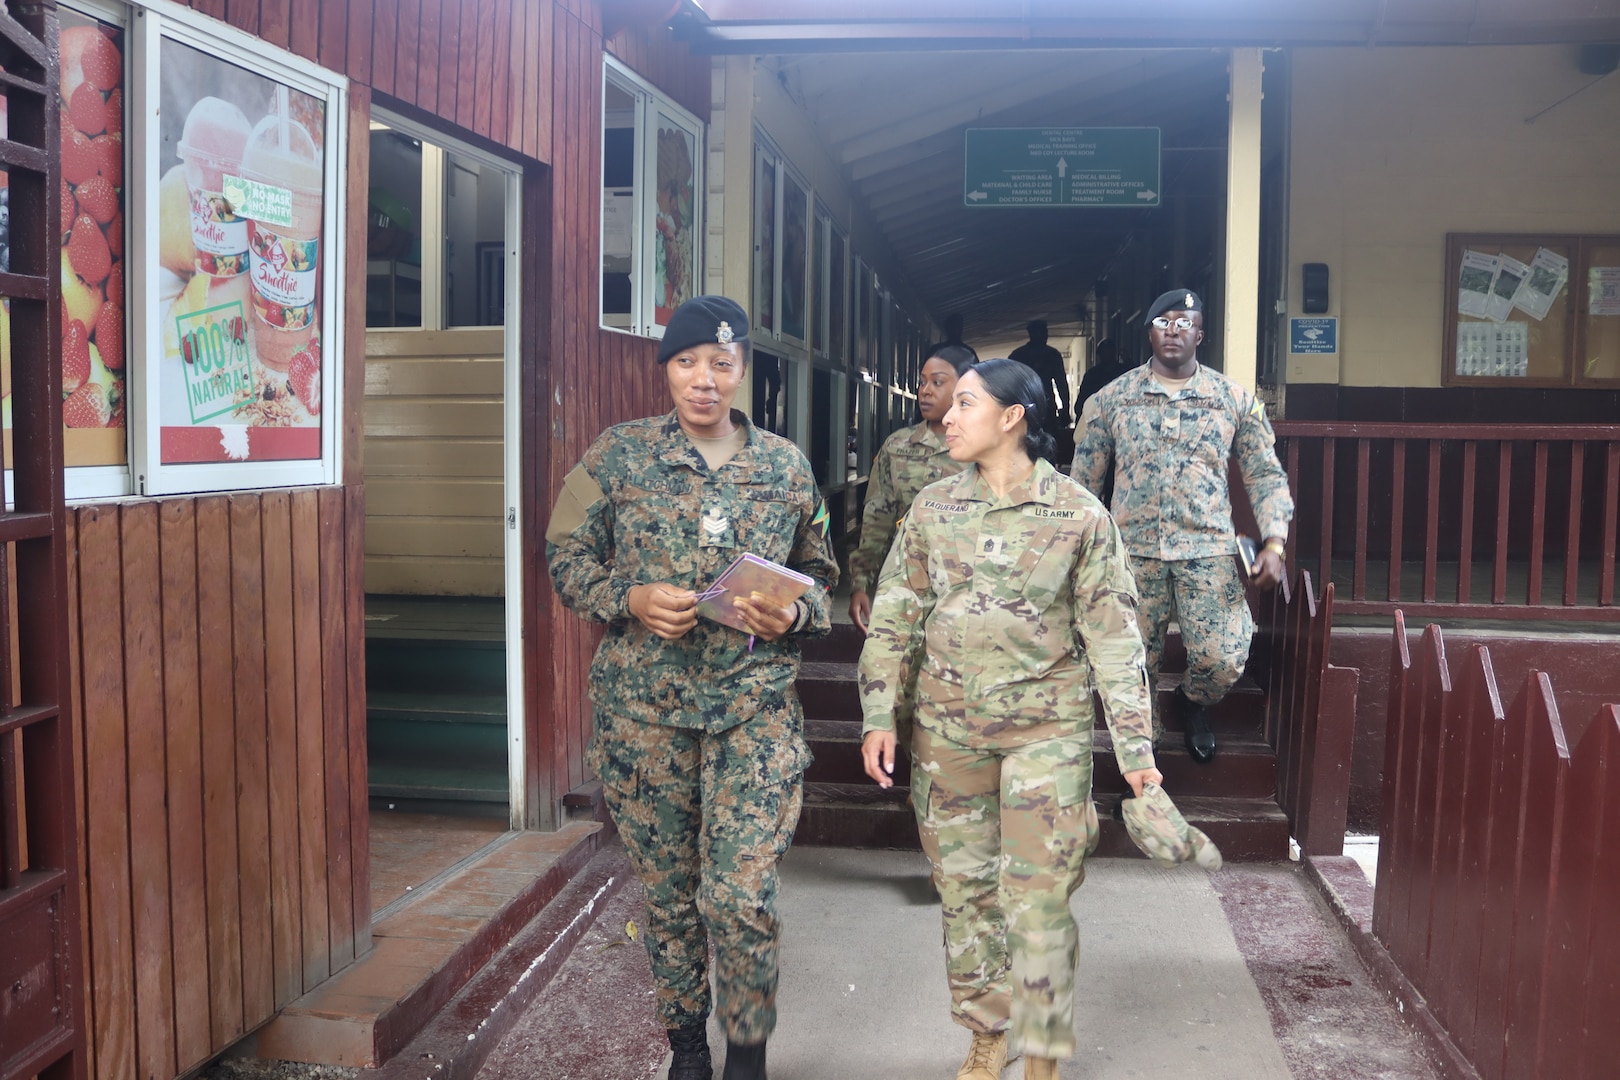 Sgt. Maj. Esmeralda Vaquerano, G-1 (personnel) Sergeant Major for the D.C. Army National Guard receives a tour from a member of the Jamaica Defence Force (JDF) during a State Partnership Program visit to the Caribbean Military Academy (CMA), Dec. 12-14, 2023. D.C. Guard members participated in an NCO Career Development Subject Matter Expert Exchange (SMEE) which included reviewing training, promotions, leadership, duties and responsibilities of NCOs with JDF’s Jamaica Regiment, Support Brigade, and the Martitime, Air and Cyber Command (MACC).